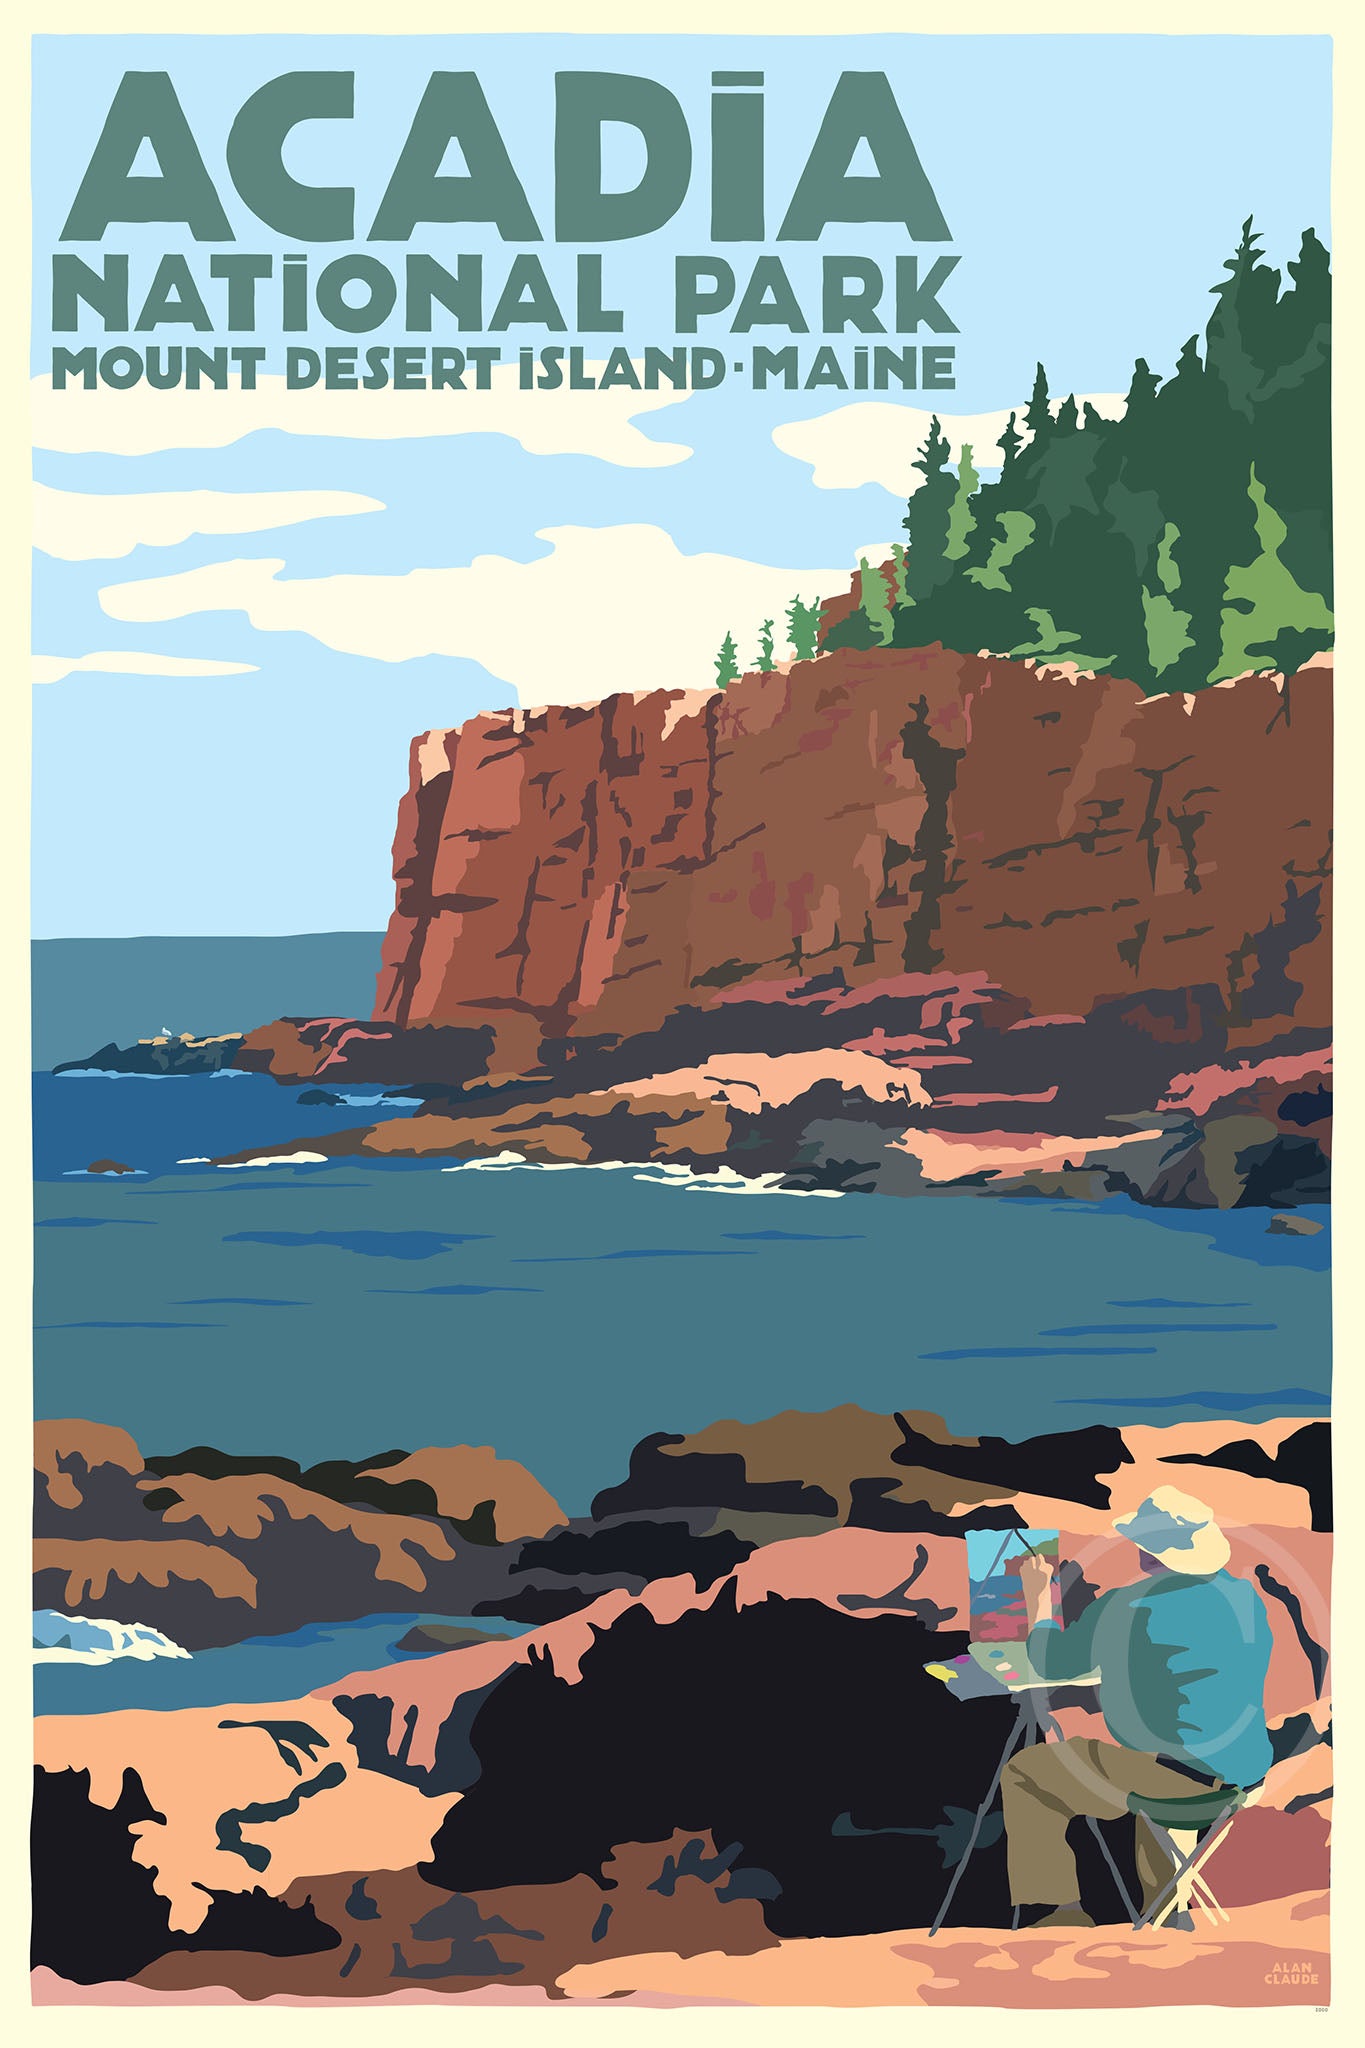 Painting In Acadia National Park Art Print 36" x 53" Wall Poster By Alan Claude - Maine